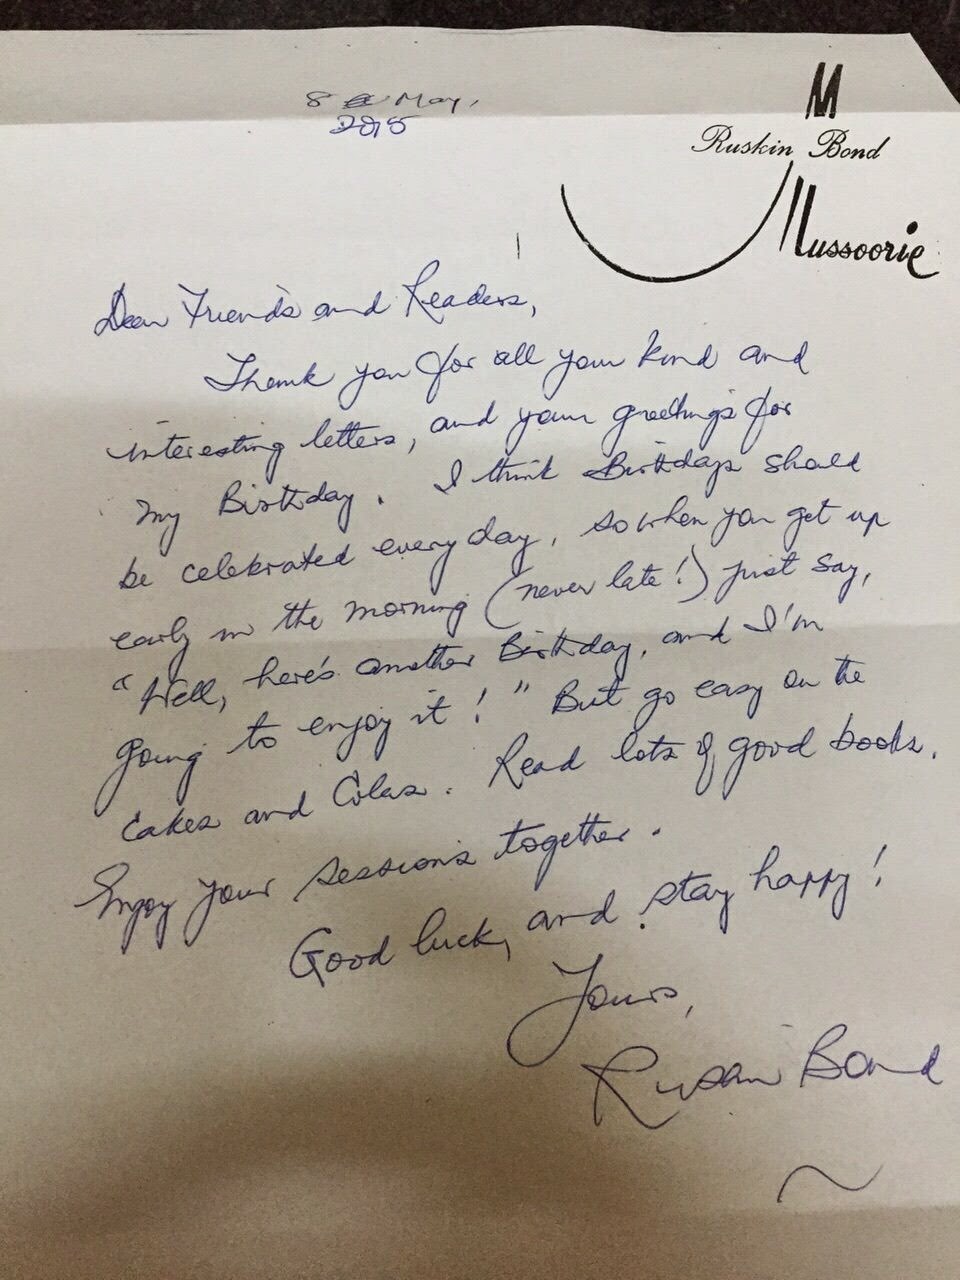 A letter from Ruskin Bond